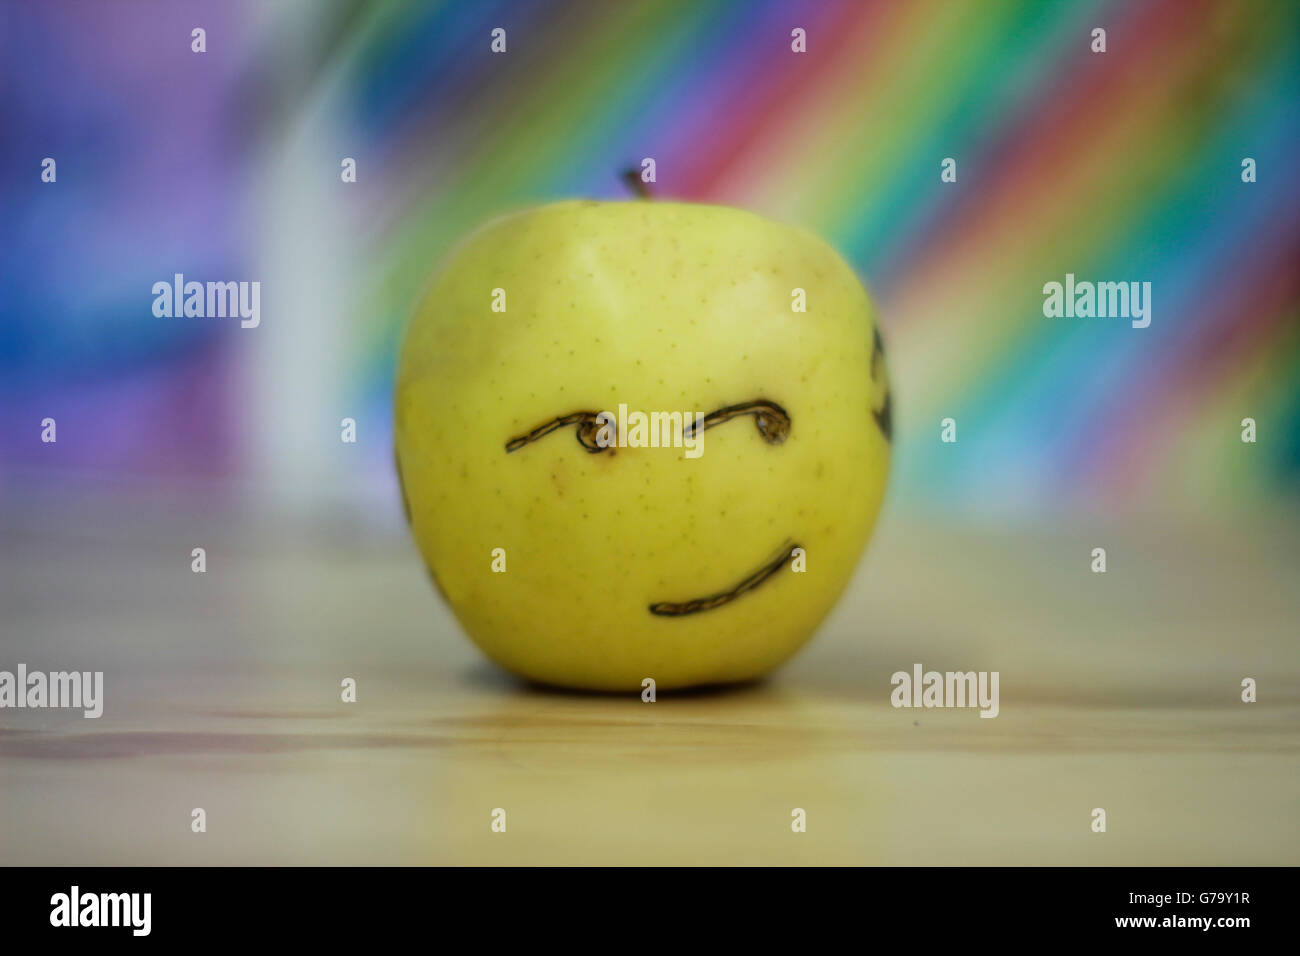 Photograh of an apple with a happy smiling face and colorful blurred background Stock Photo